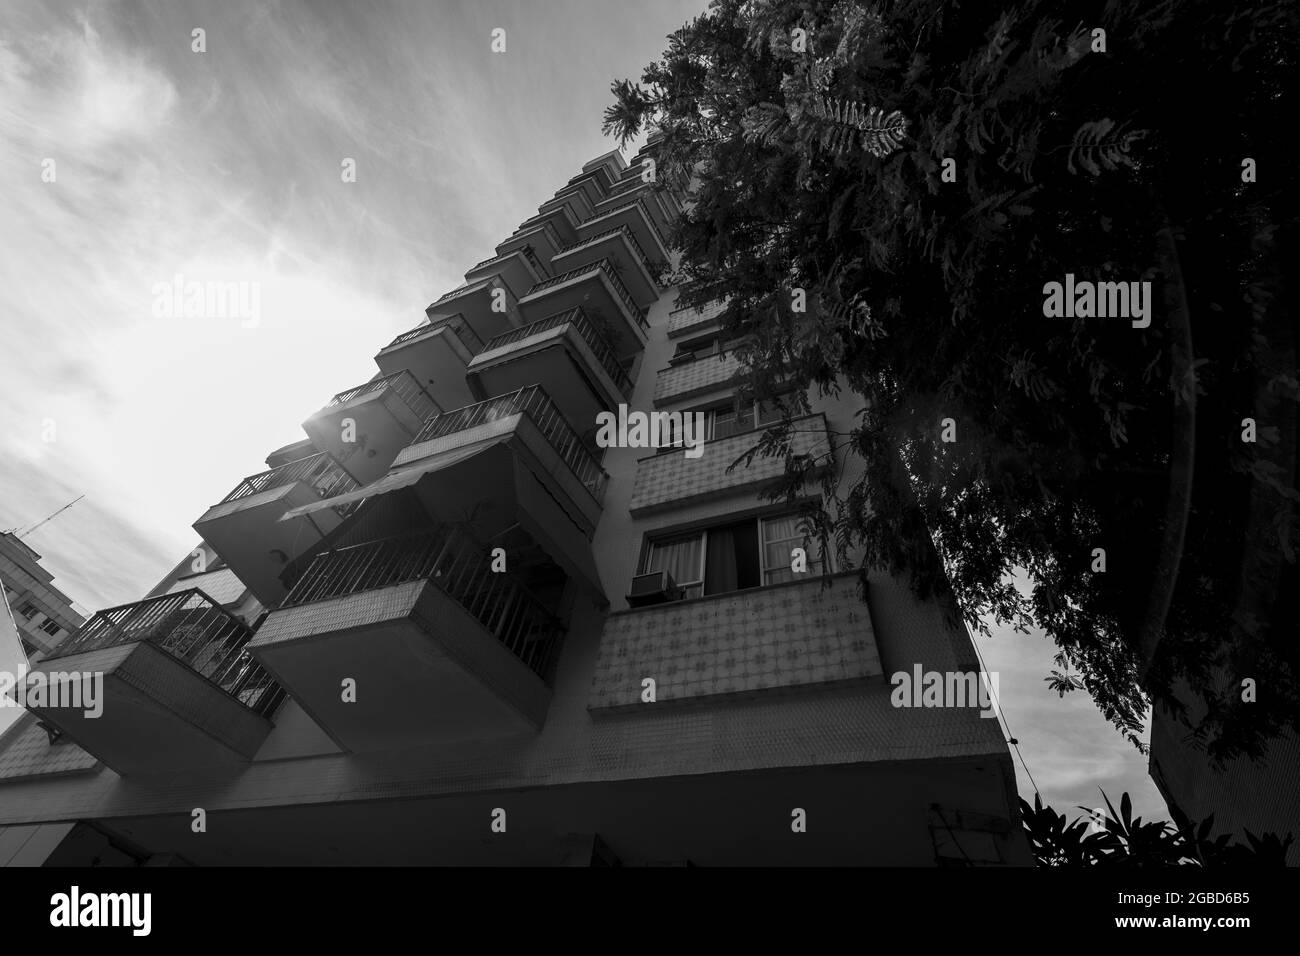 Grayscale shot of balconies in the apartment building against a cloudy sky Stock Photo